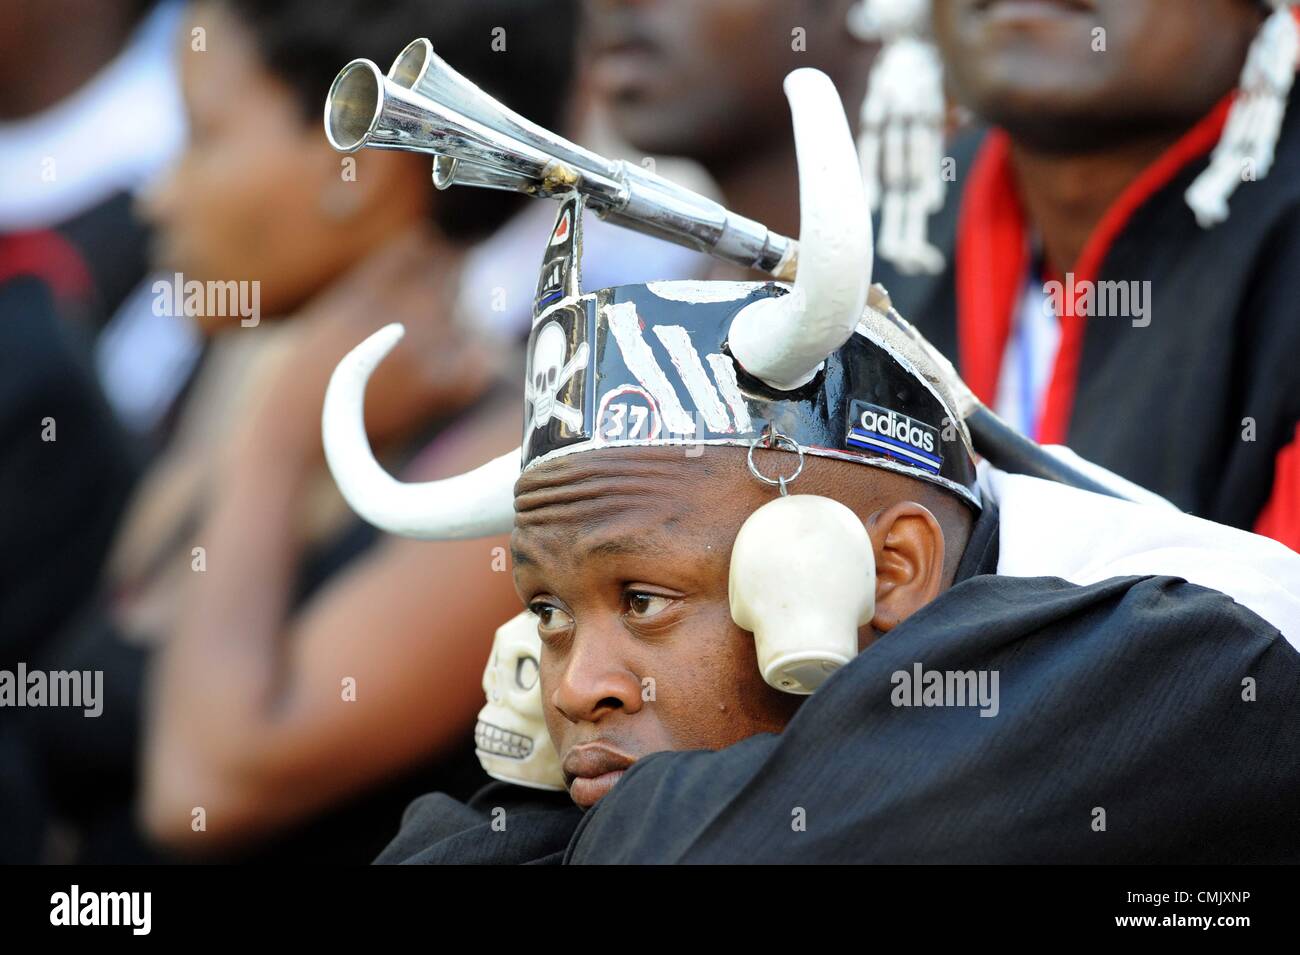 POLOKWANE, SOUTH AFRICA - AUGUST 19, a upset fan during the MTN 8 1st leg semi final match between SuperSport United and Orlando Pirates at Peter Mokaba Stadium on August 19, 2012 in Polokwane, South Africa Photo by Lee Warren / Gallo Images Stock Photo